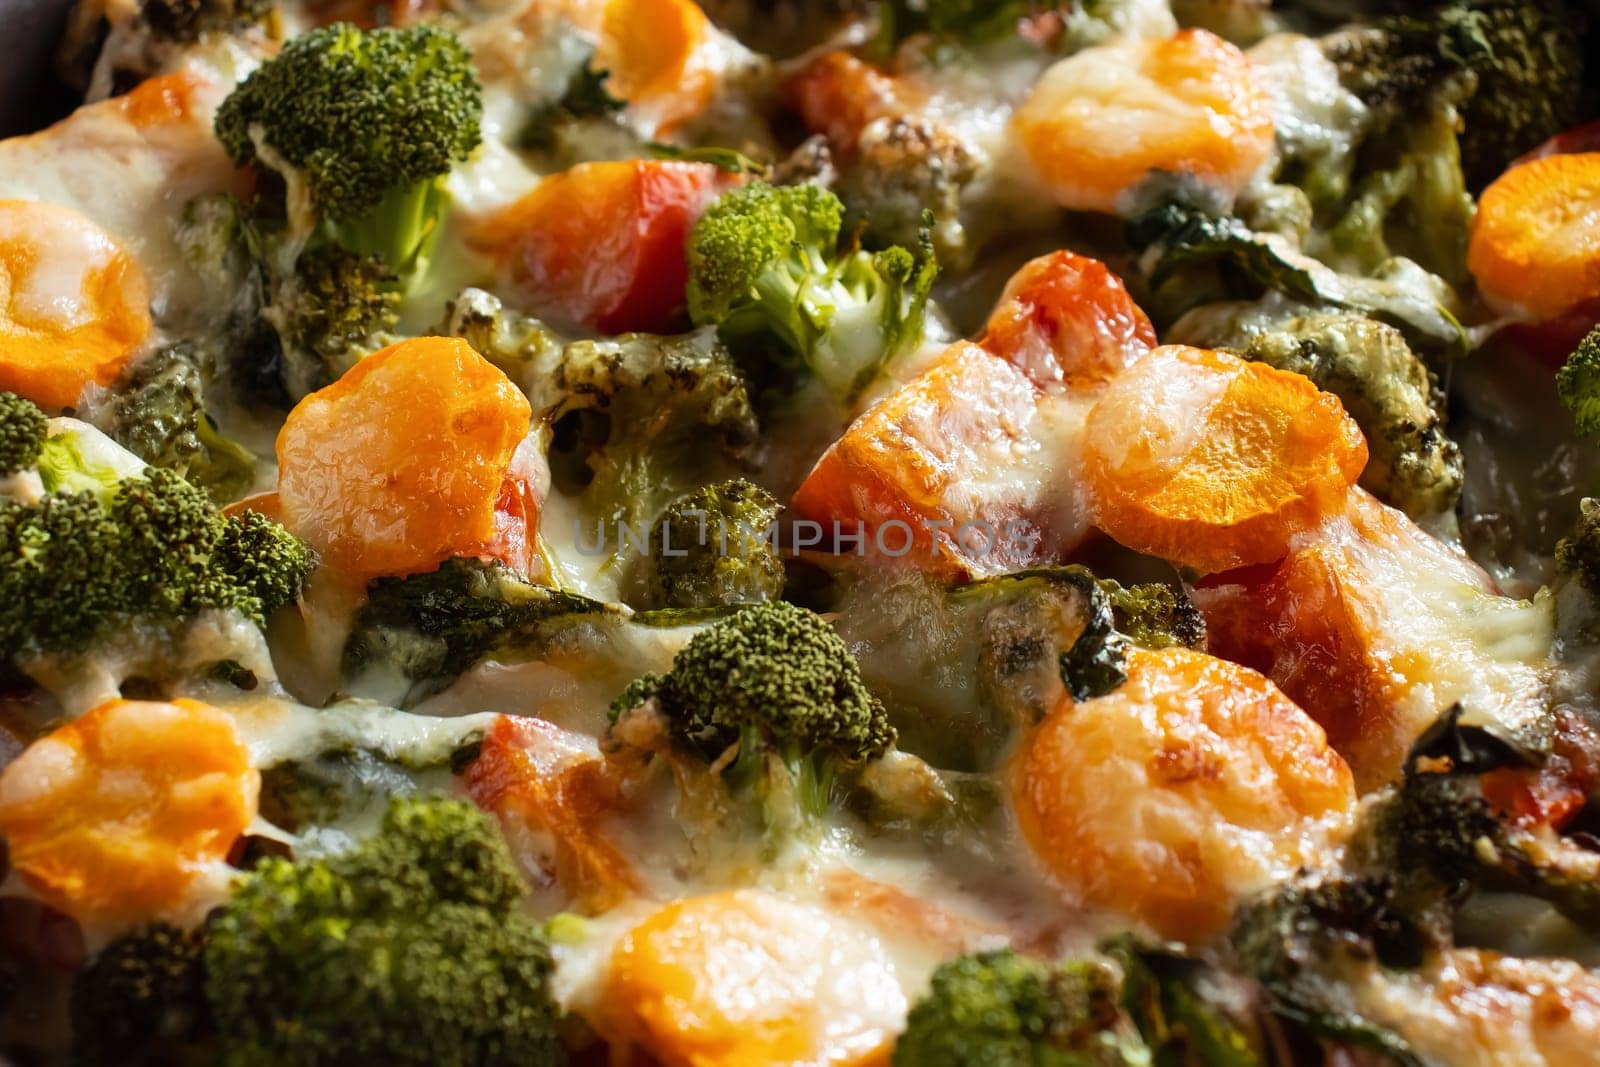 Gratin with broccoli, carrots and cheese baked in the oven on a dark wooden table, close up by galsand